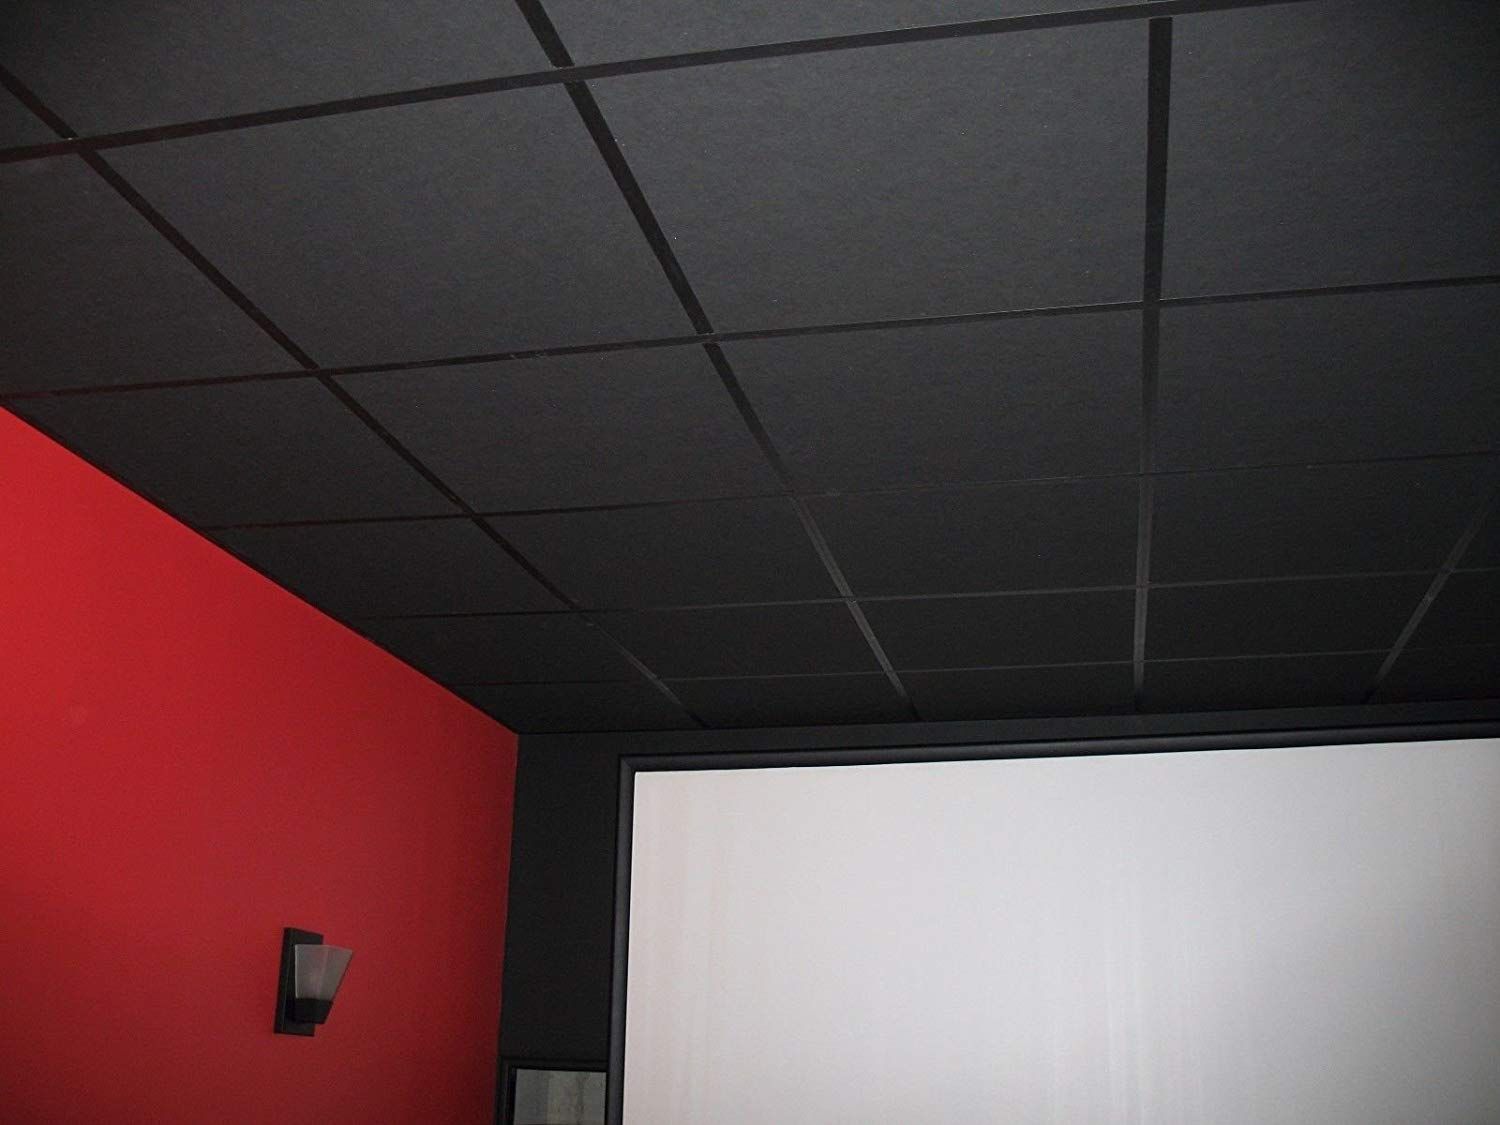 How To Paint Drop Ceiling Tiles